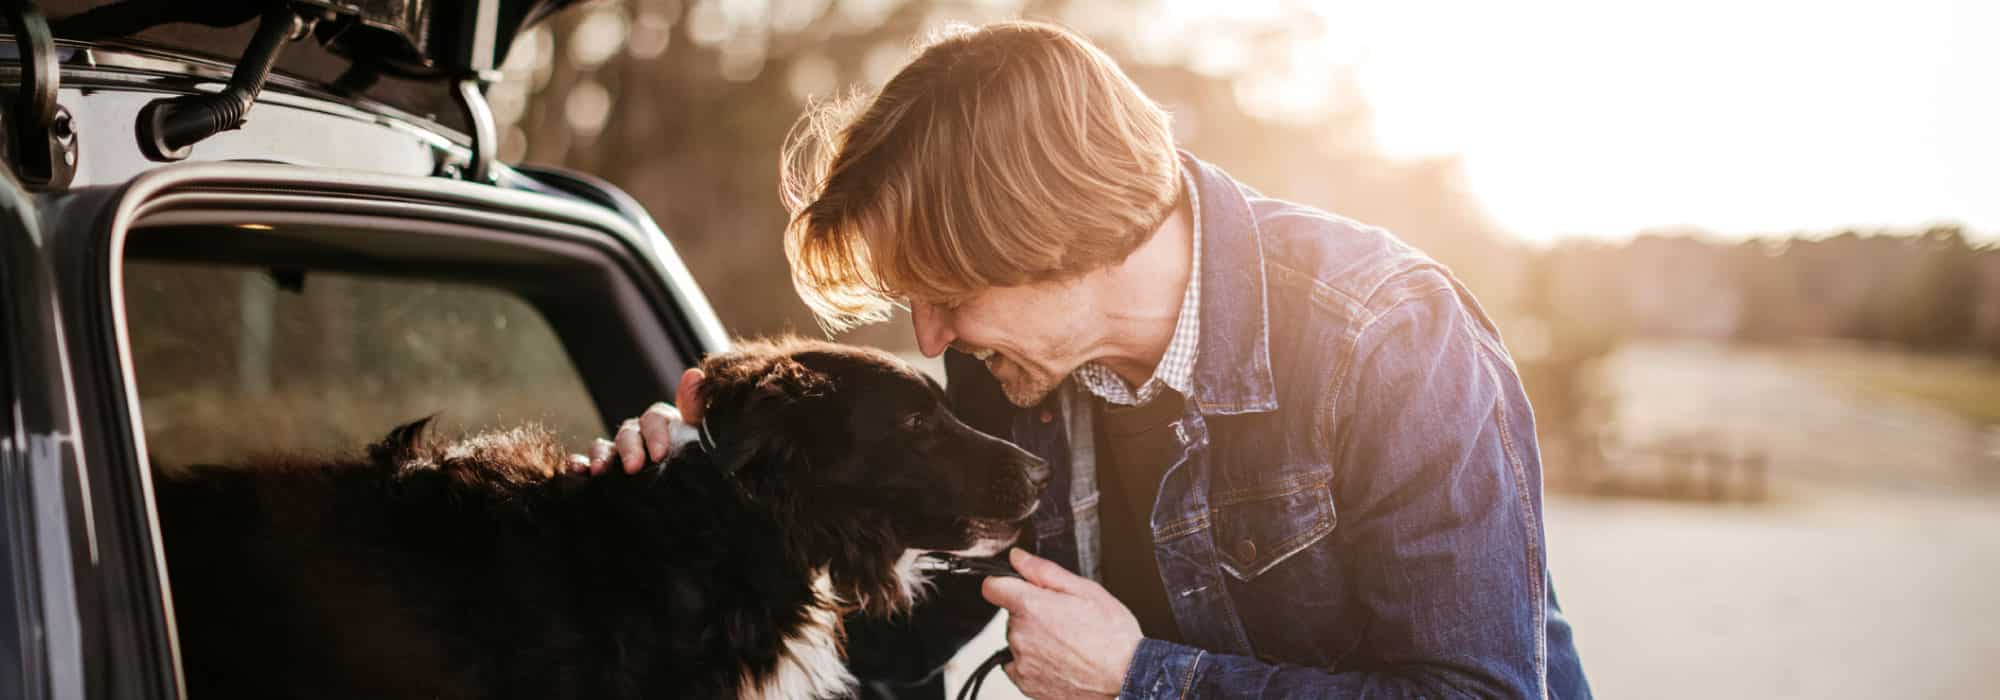 A man petting a dog, the dog has its' head outside of the window of a car. The man is smiling.